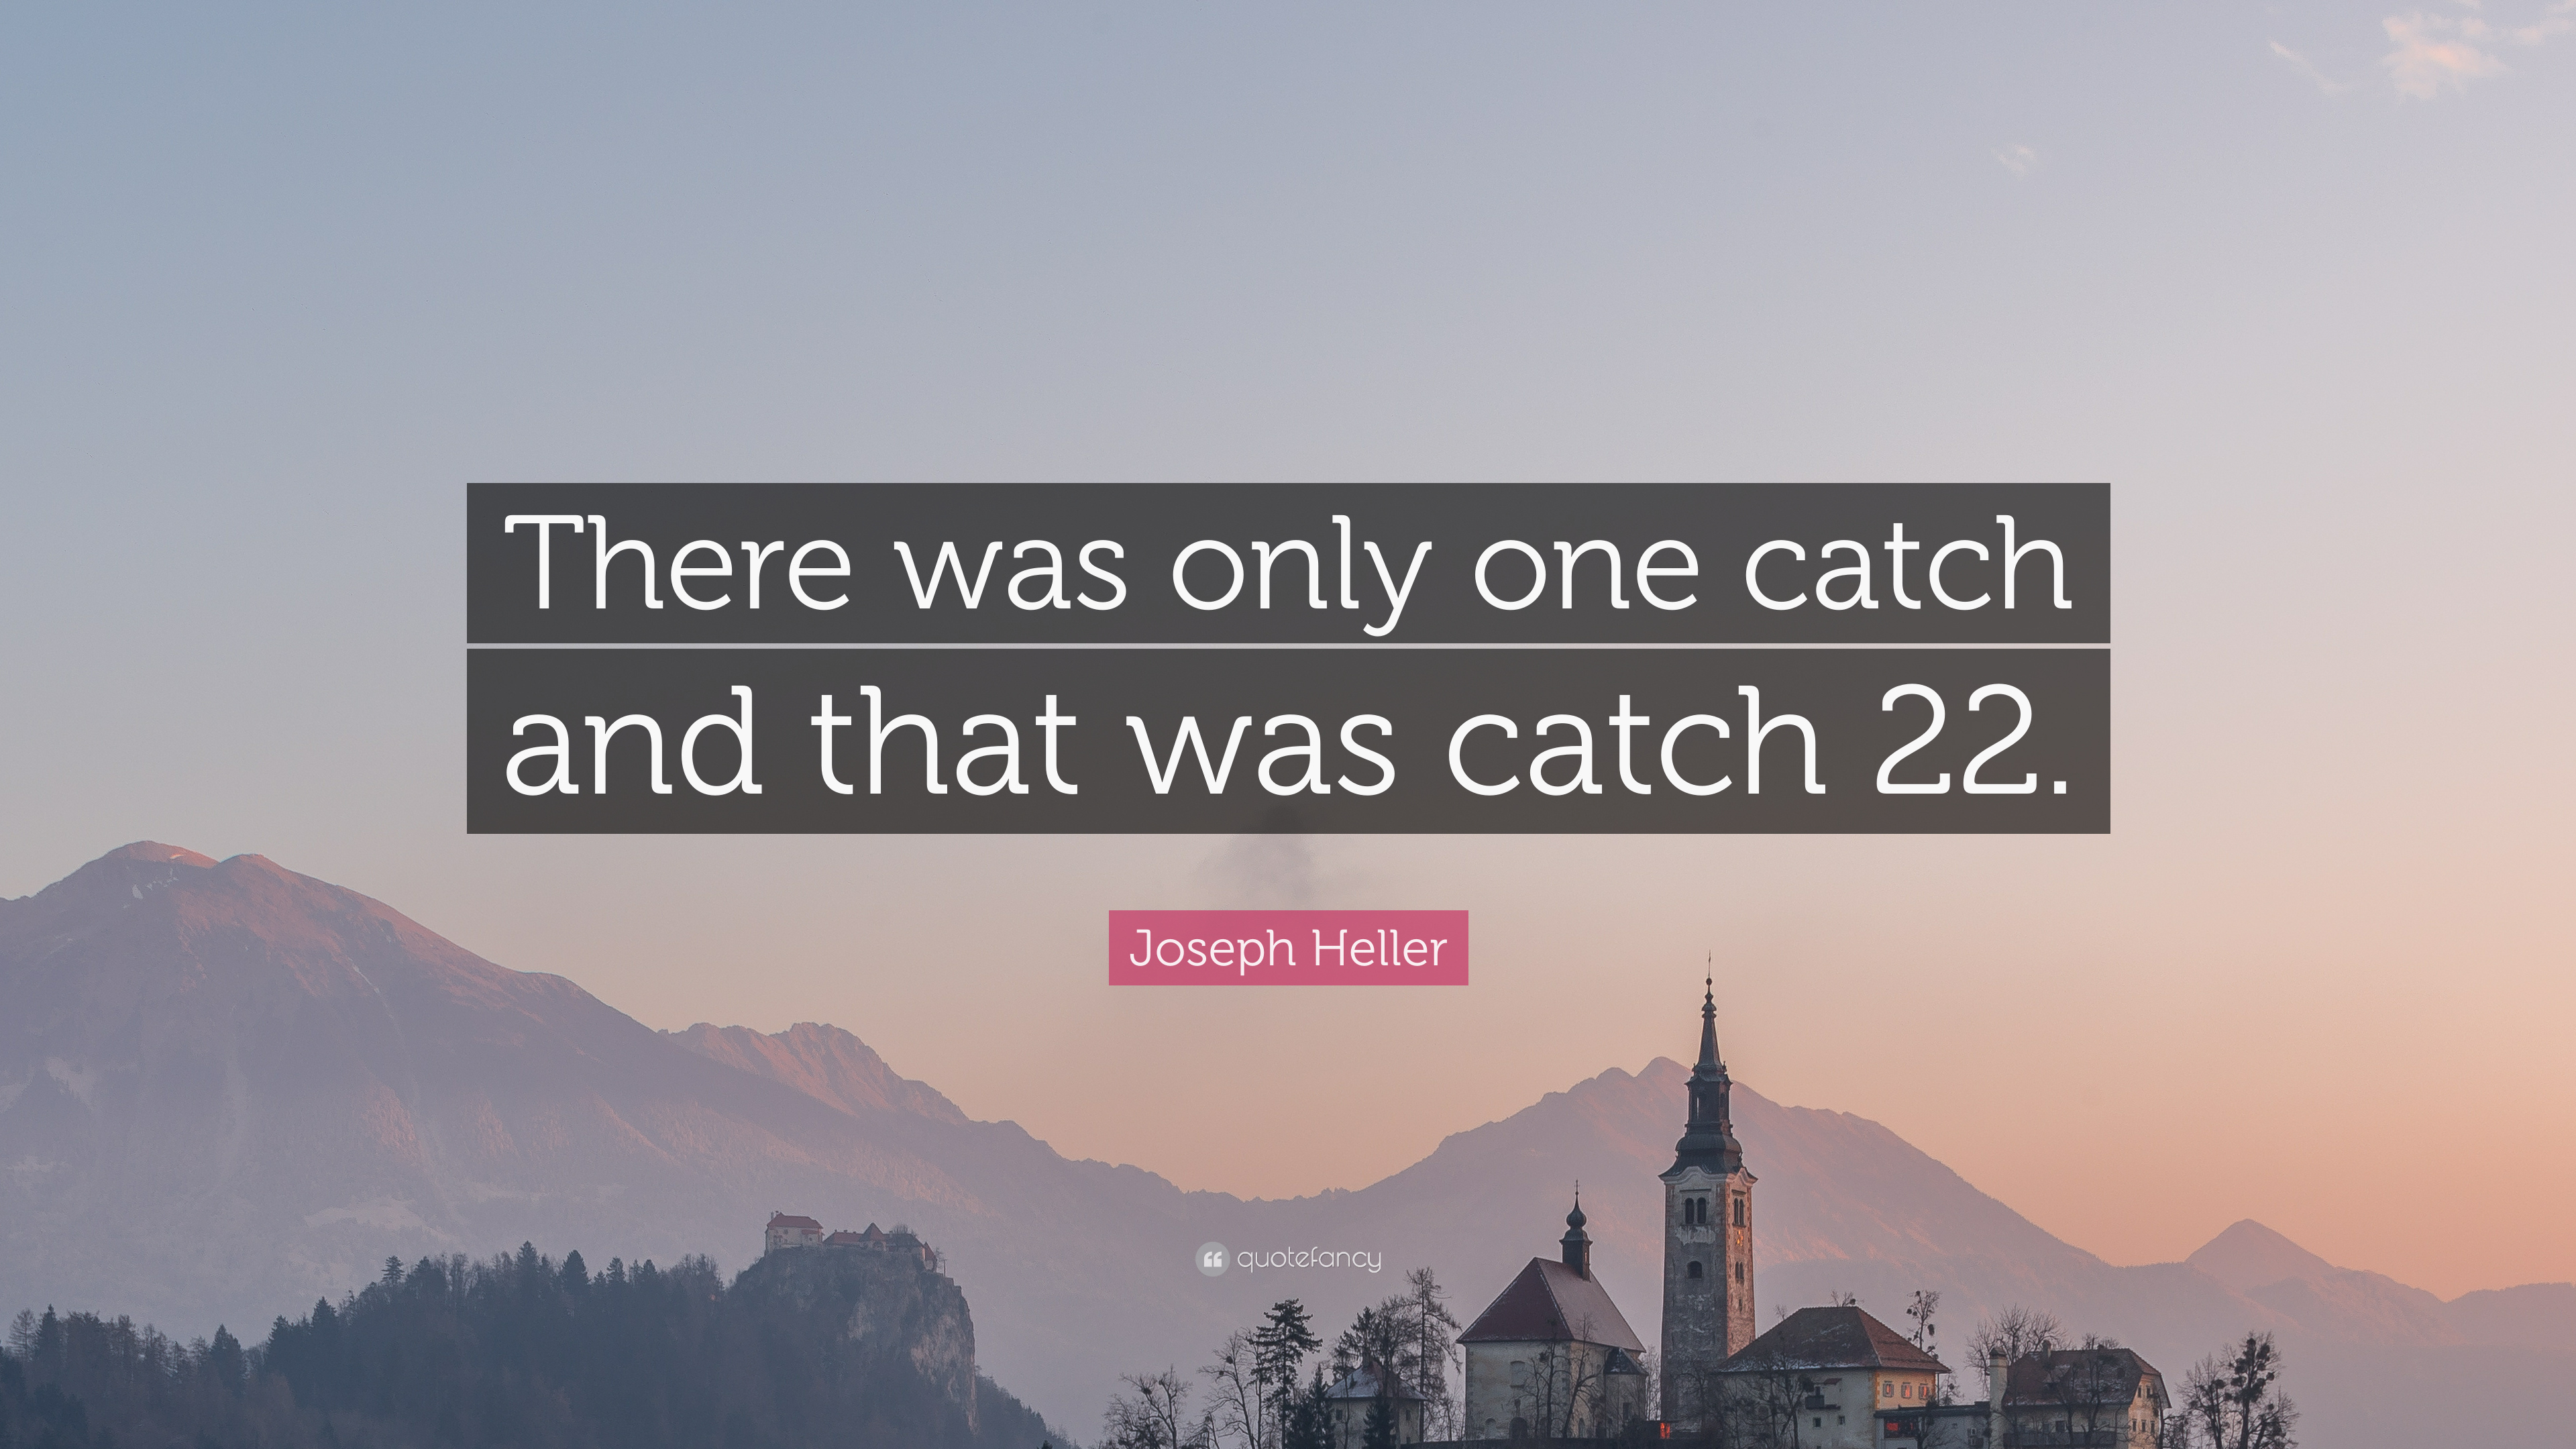 Joseph Heller Quote: “There was only one catch and that was catch 22